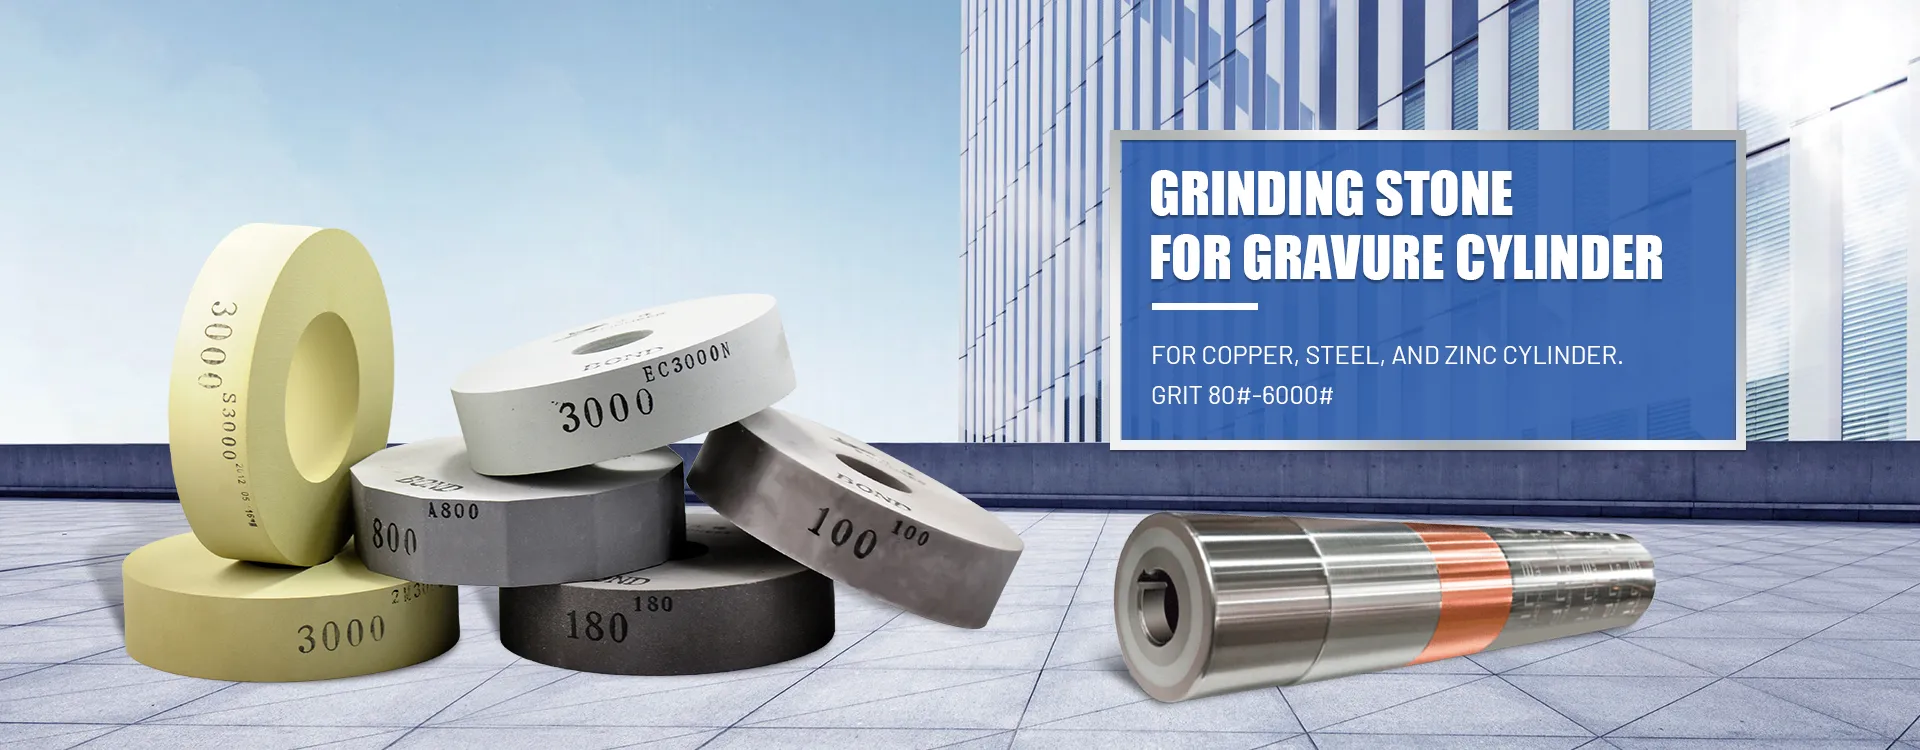 Grinding Stone for Gravure Cylinder